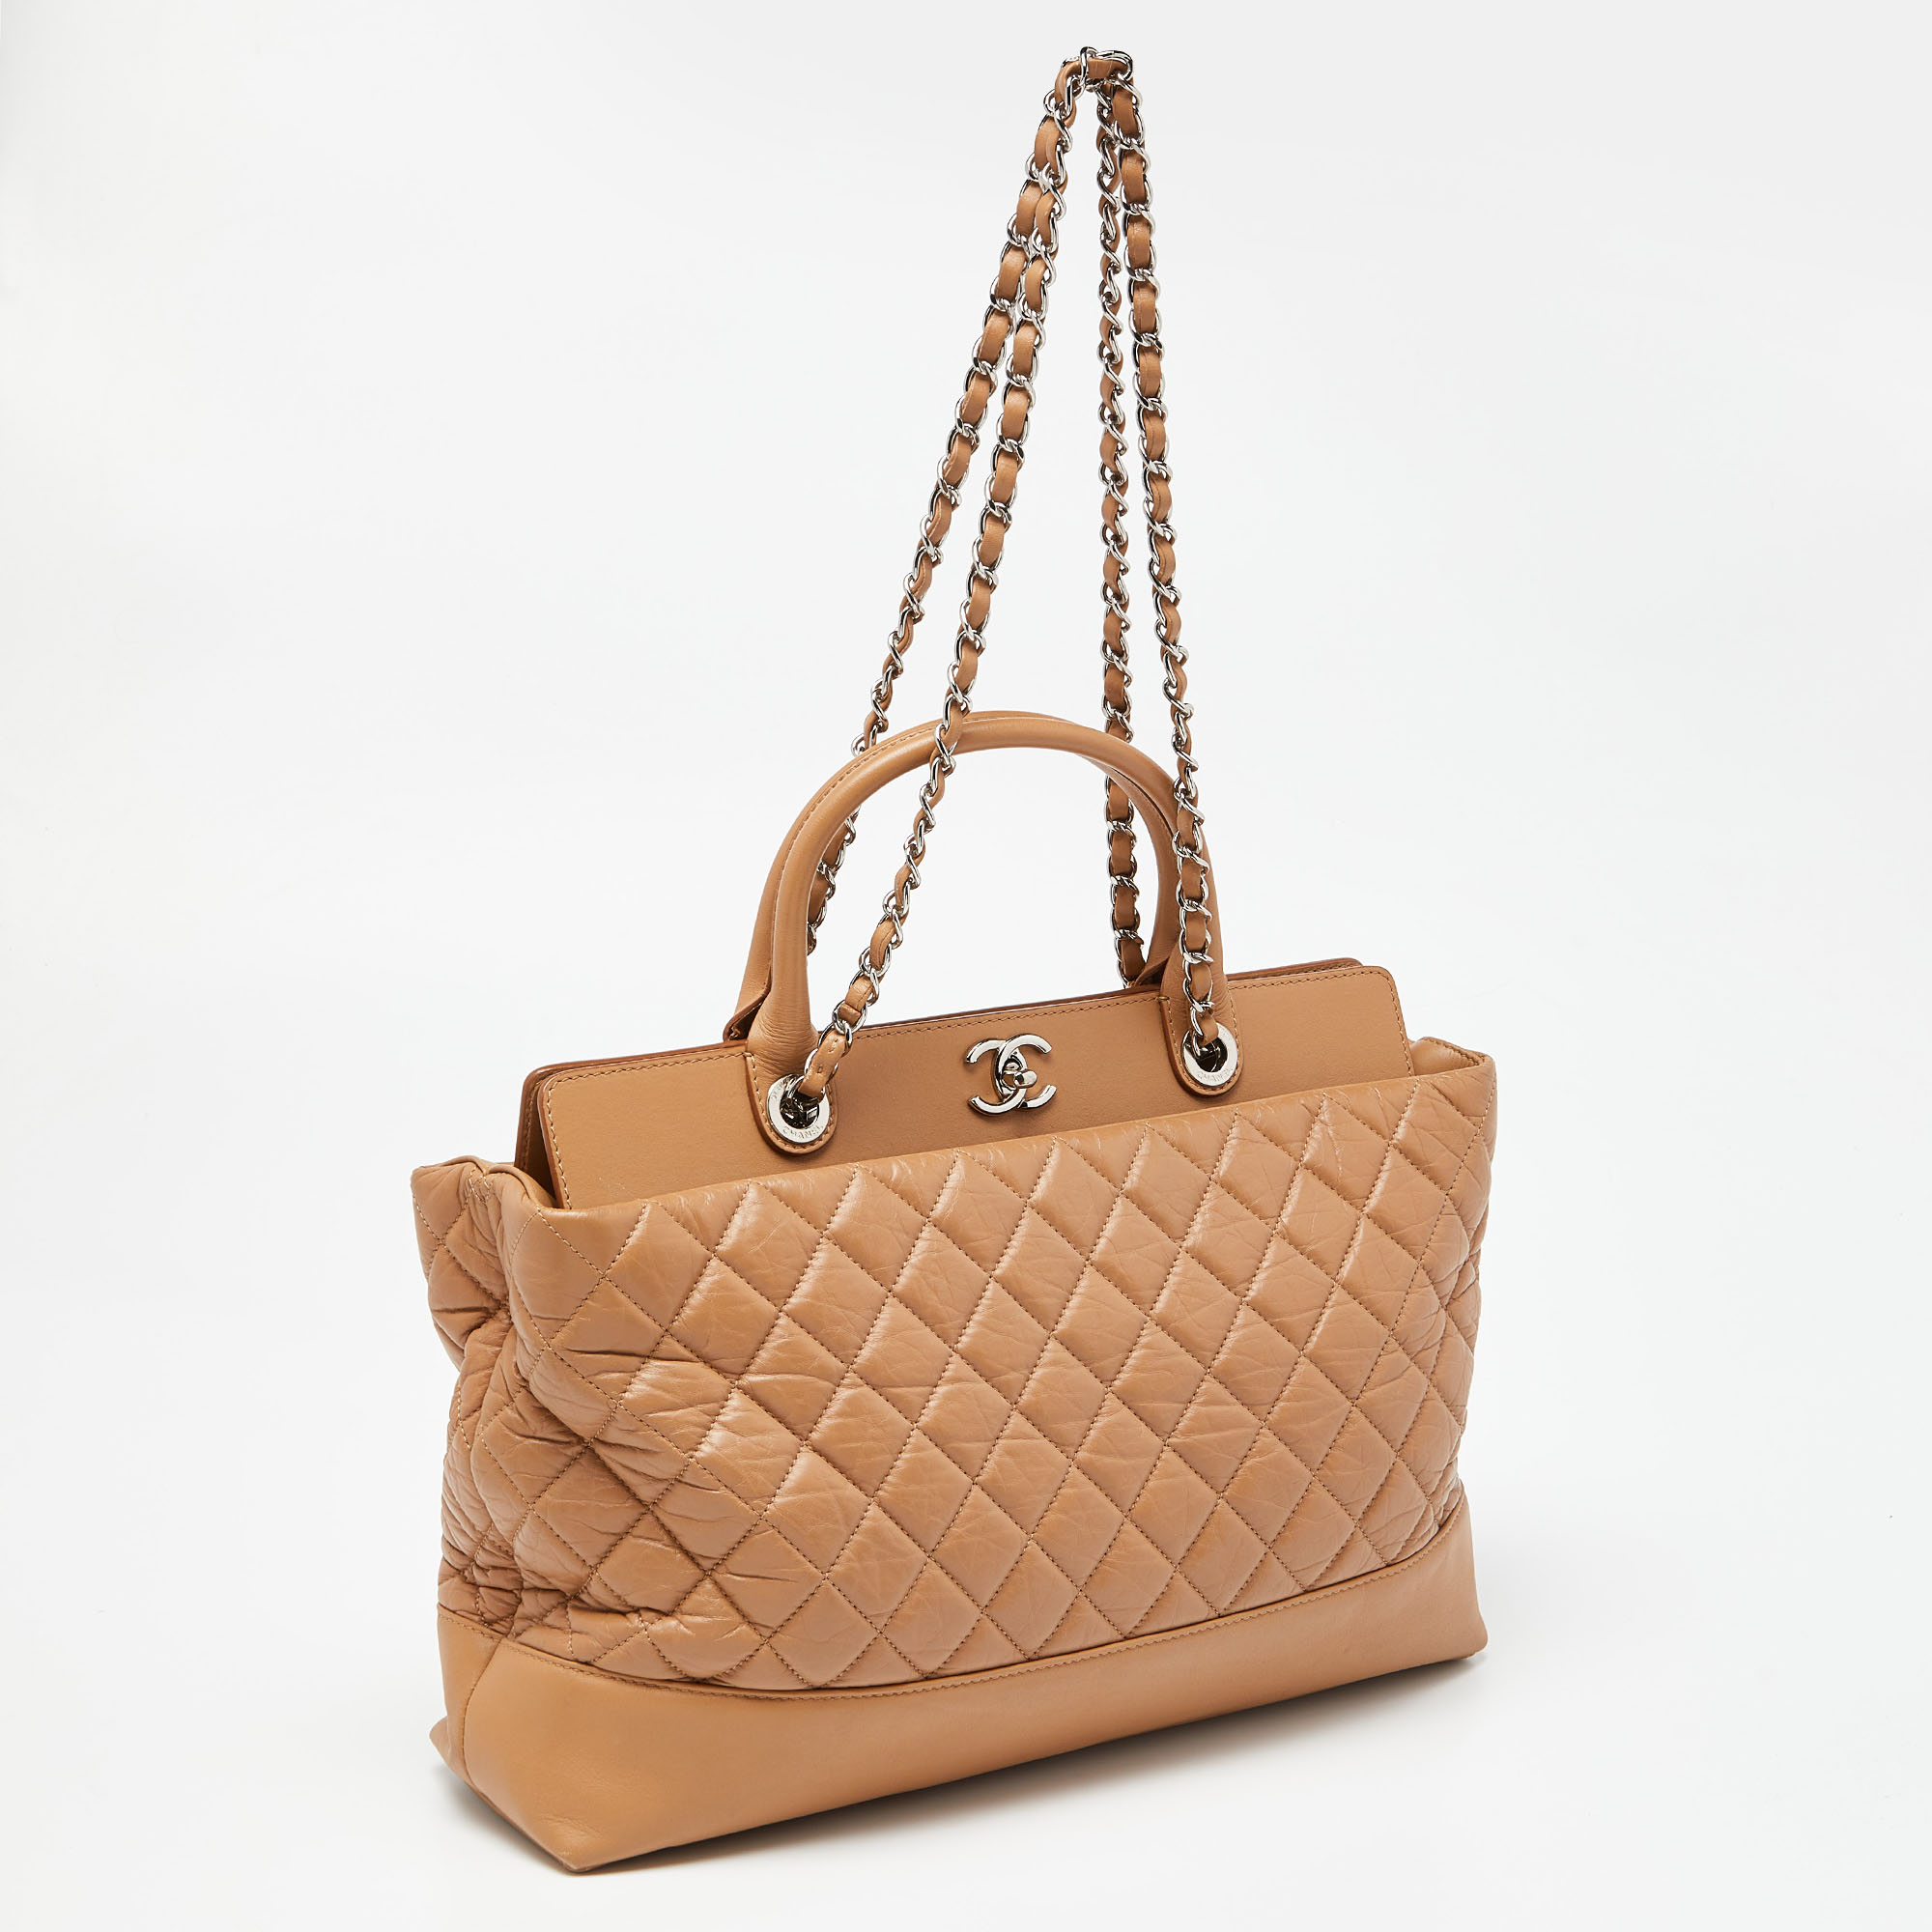 Chanel Beige Quilted Leather CC Shopper Tote